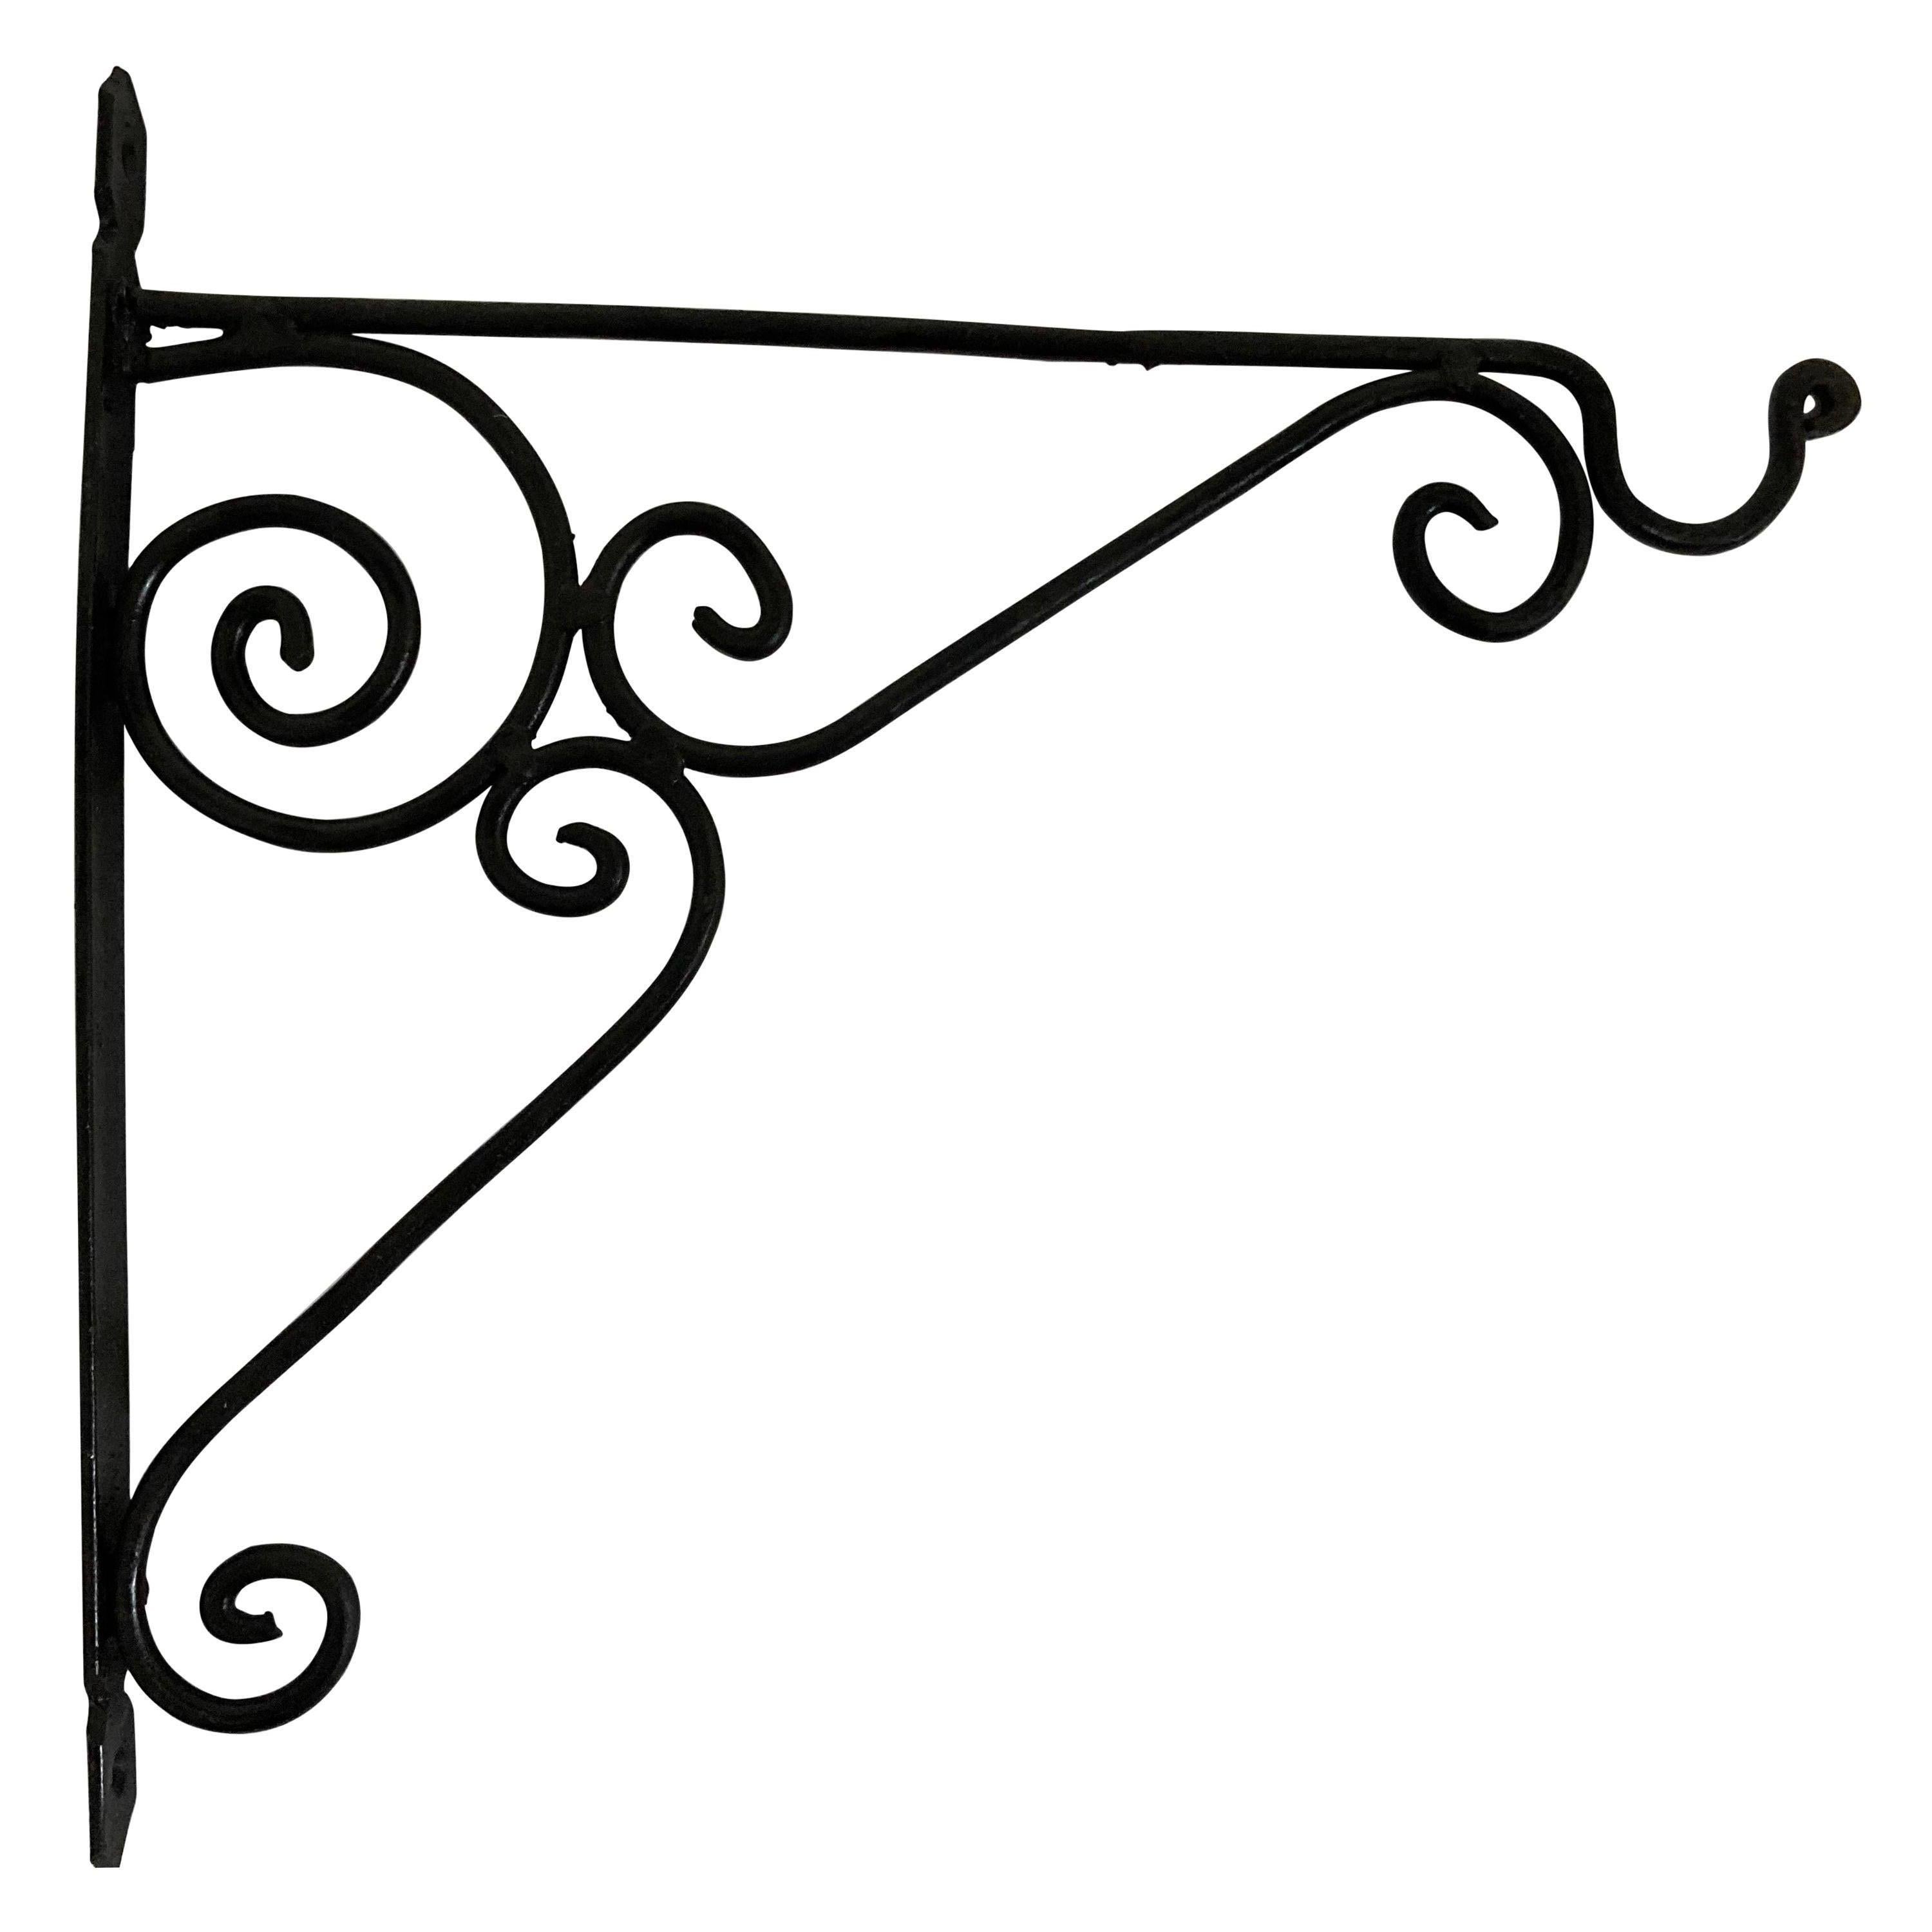 Hand crafted iron scroll design wall bracket. 
Wrought iron handcrafted wall-bracket for lanterns or signs.
Perfect for hanging lights or plants outdoors.
Scrolling wall-mounted brackets.
Multiple available.
Dimensions: Projection: 12